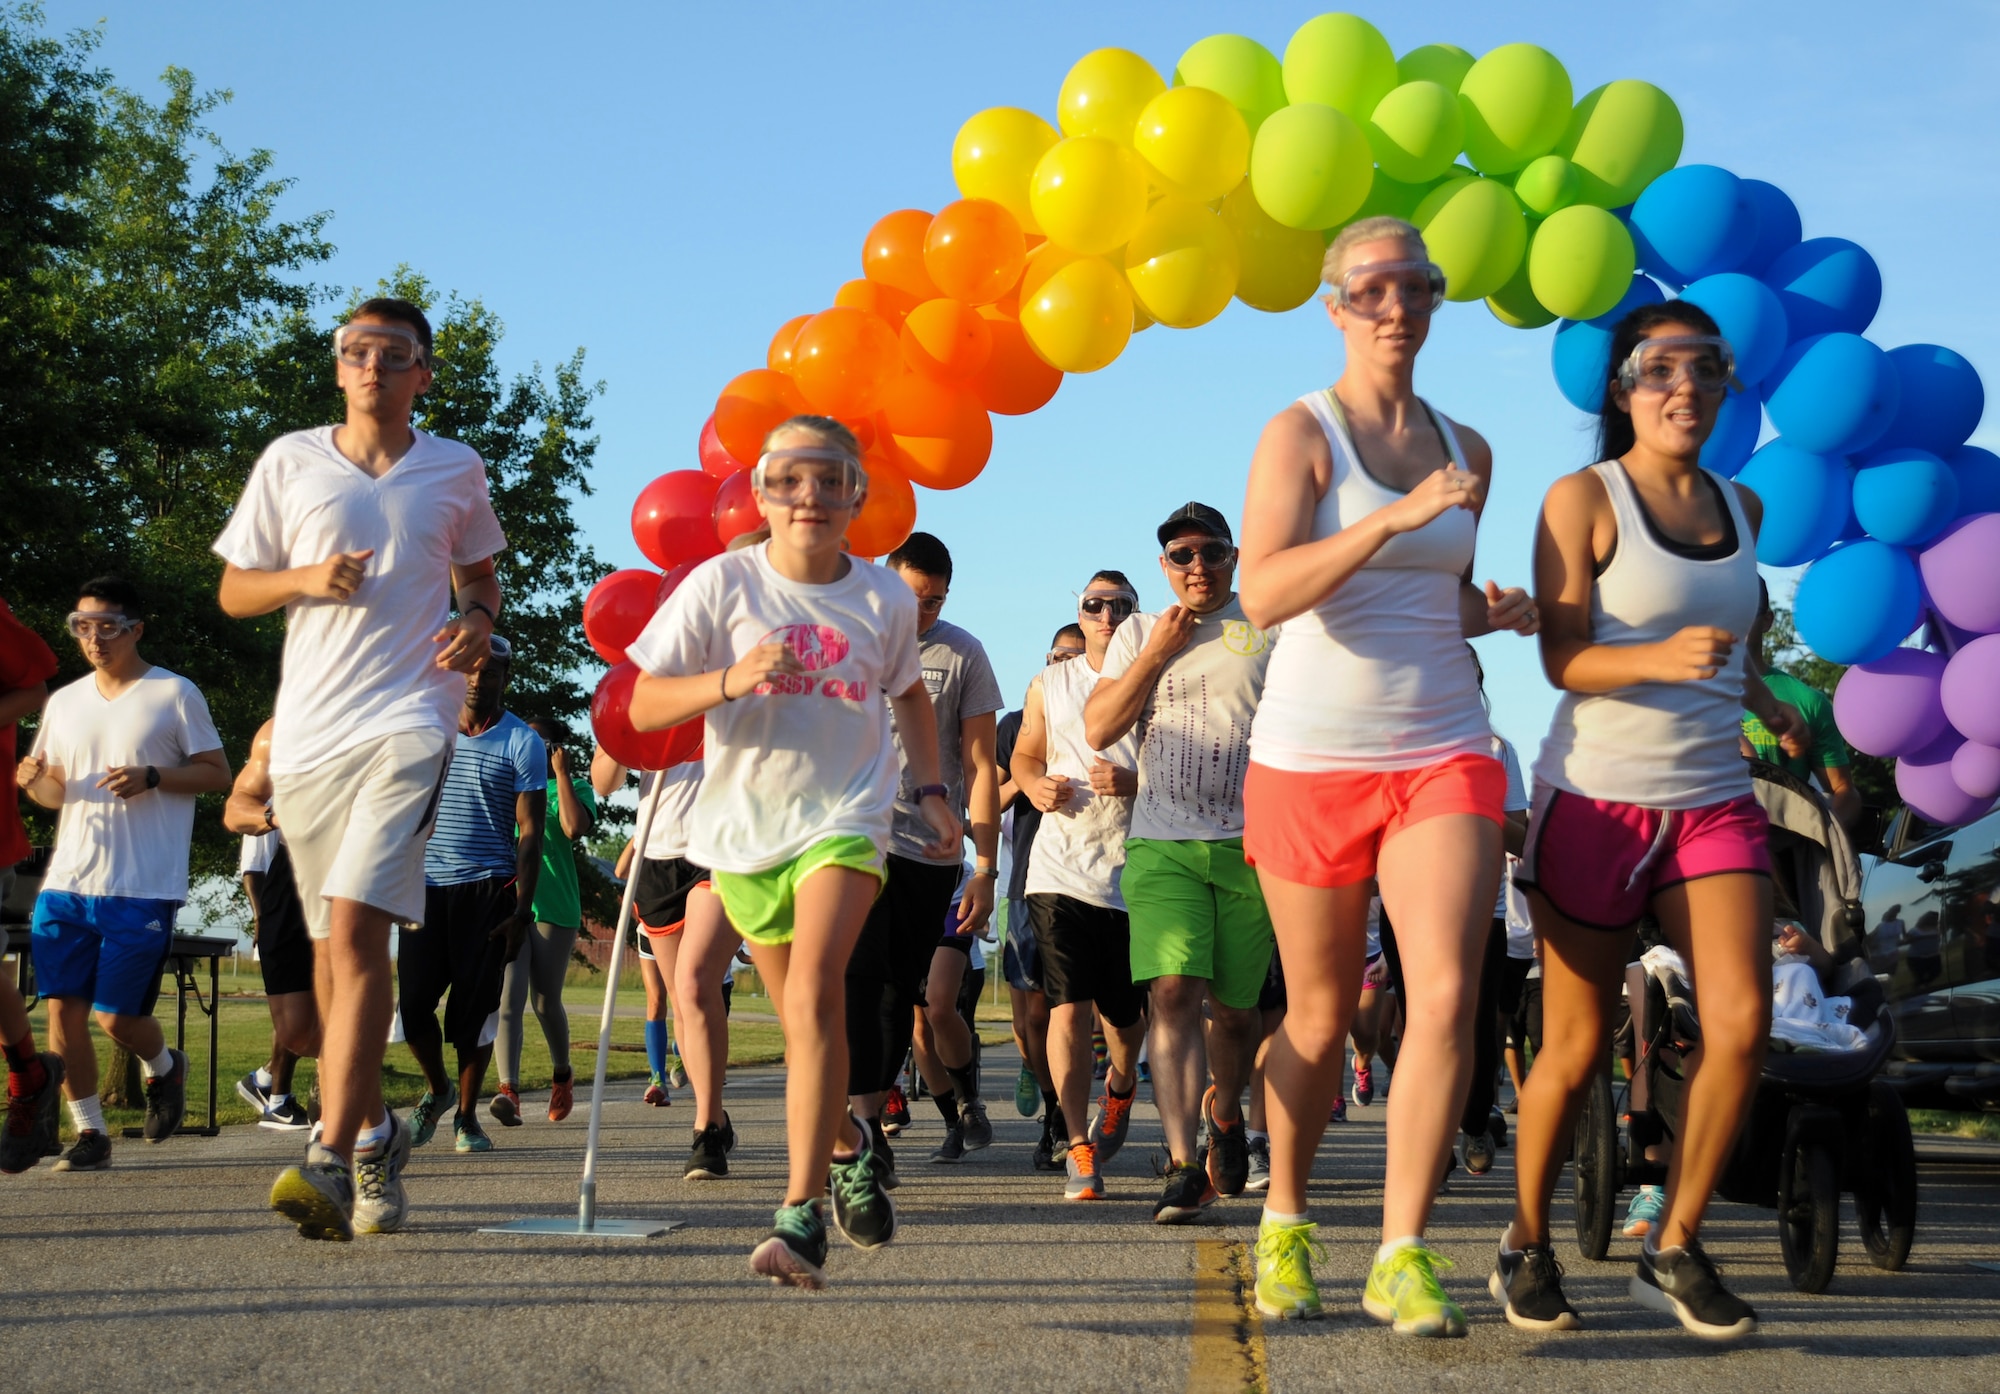 Participants begin running the Lesbian, Gay, Bisexual and Transgender (LGBT) Pride Month Rainbow Run 5K at Whiteman Air Force Base, Mo., June 24, 2016. A total of 75 people participated in the run and showed their support to the LGBT community. (U.S. Air Force photo by Senior Airman Danielle Quilla)